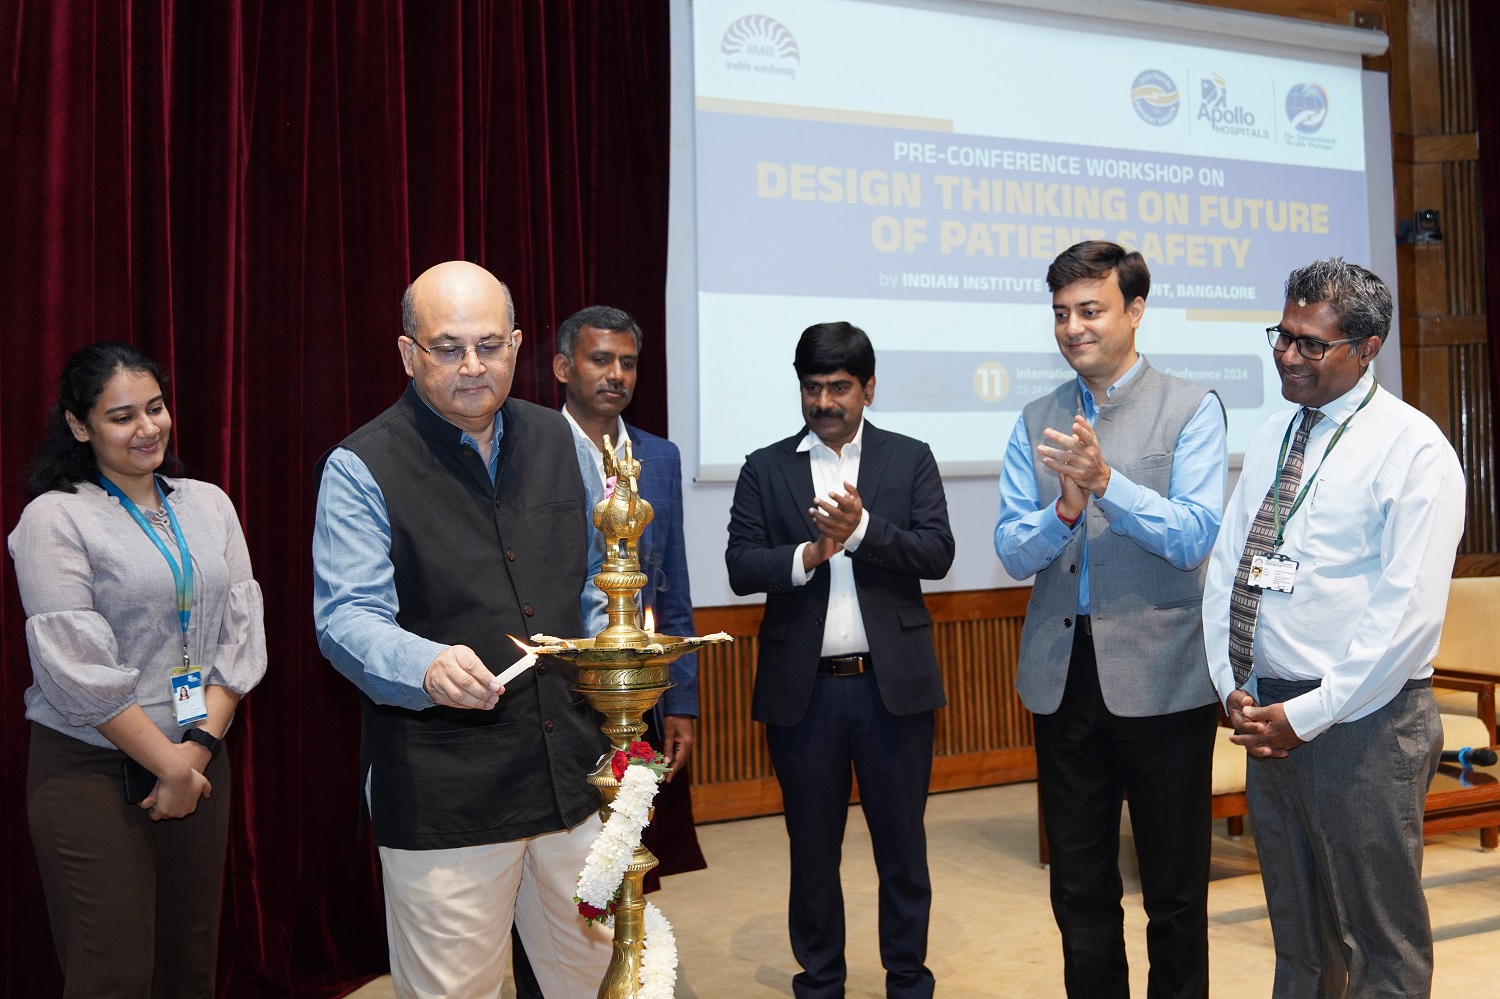 Prof. Rishikesha T Krishnan, Director, IIM Bangalore, inaugurates the Pre-Conference Workshop on ‘Design Thinking on Future of Patient Safety’, jointly organized by the Data Centre & Analytics Lab (DCAL) at IIMB and Apollo Hospitals, at IIMB, on 22nd February 2024.